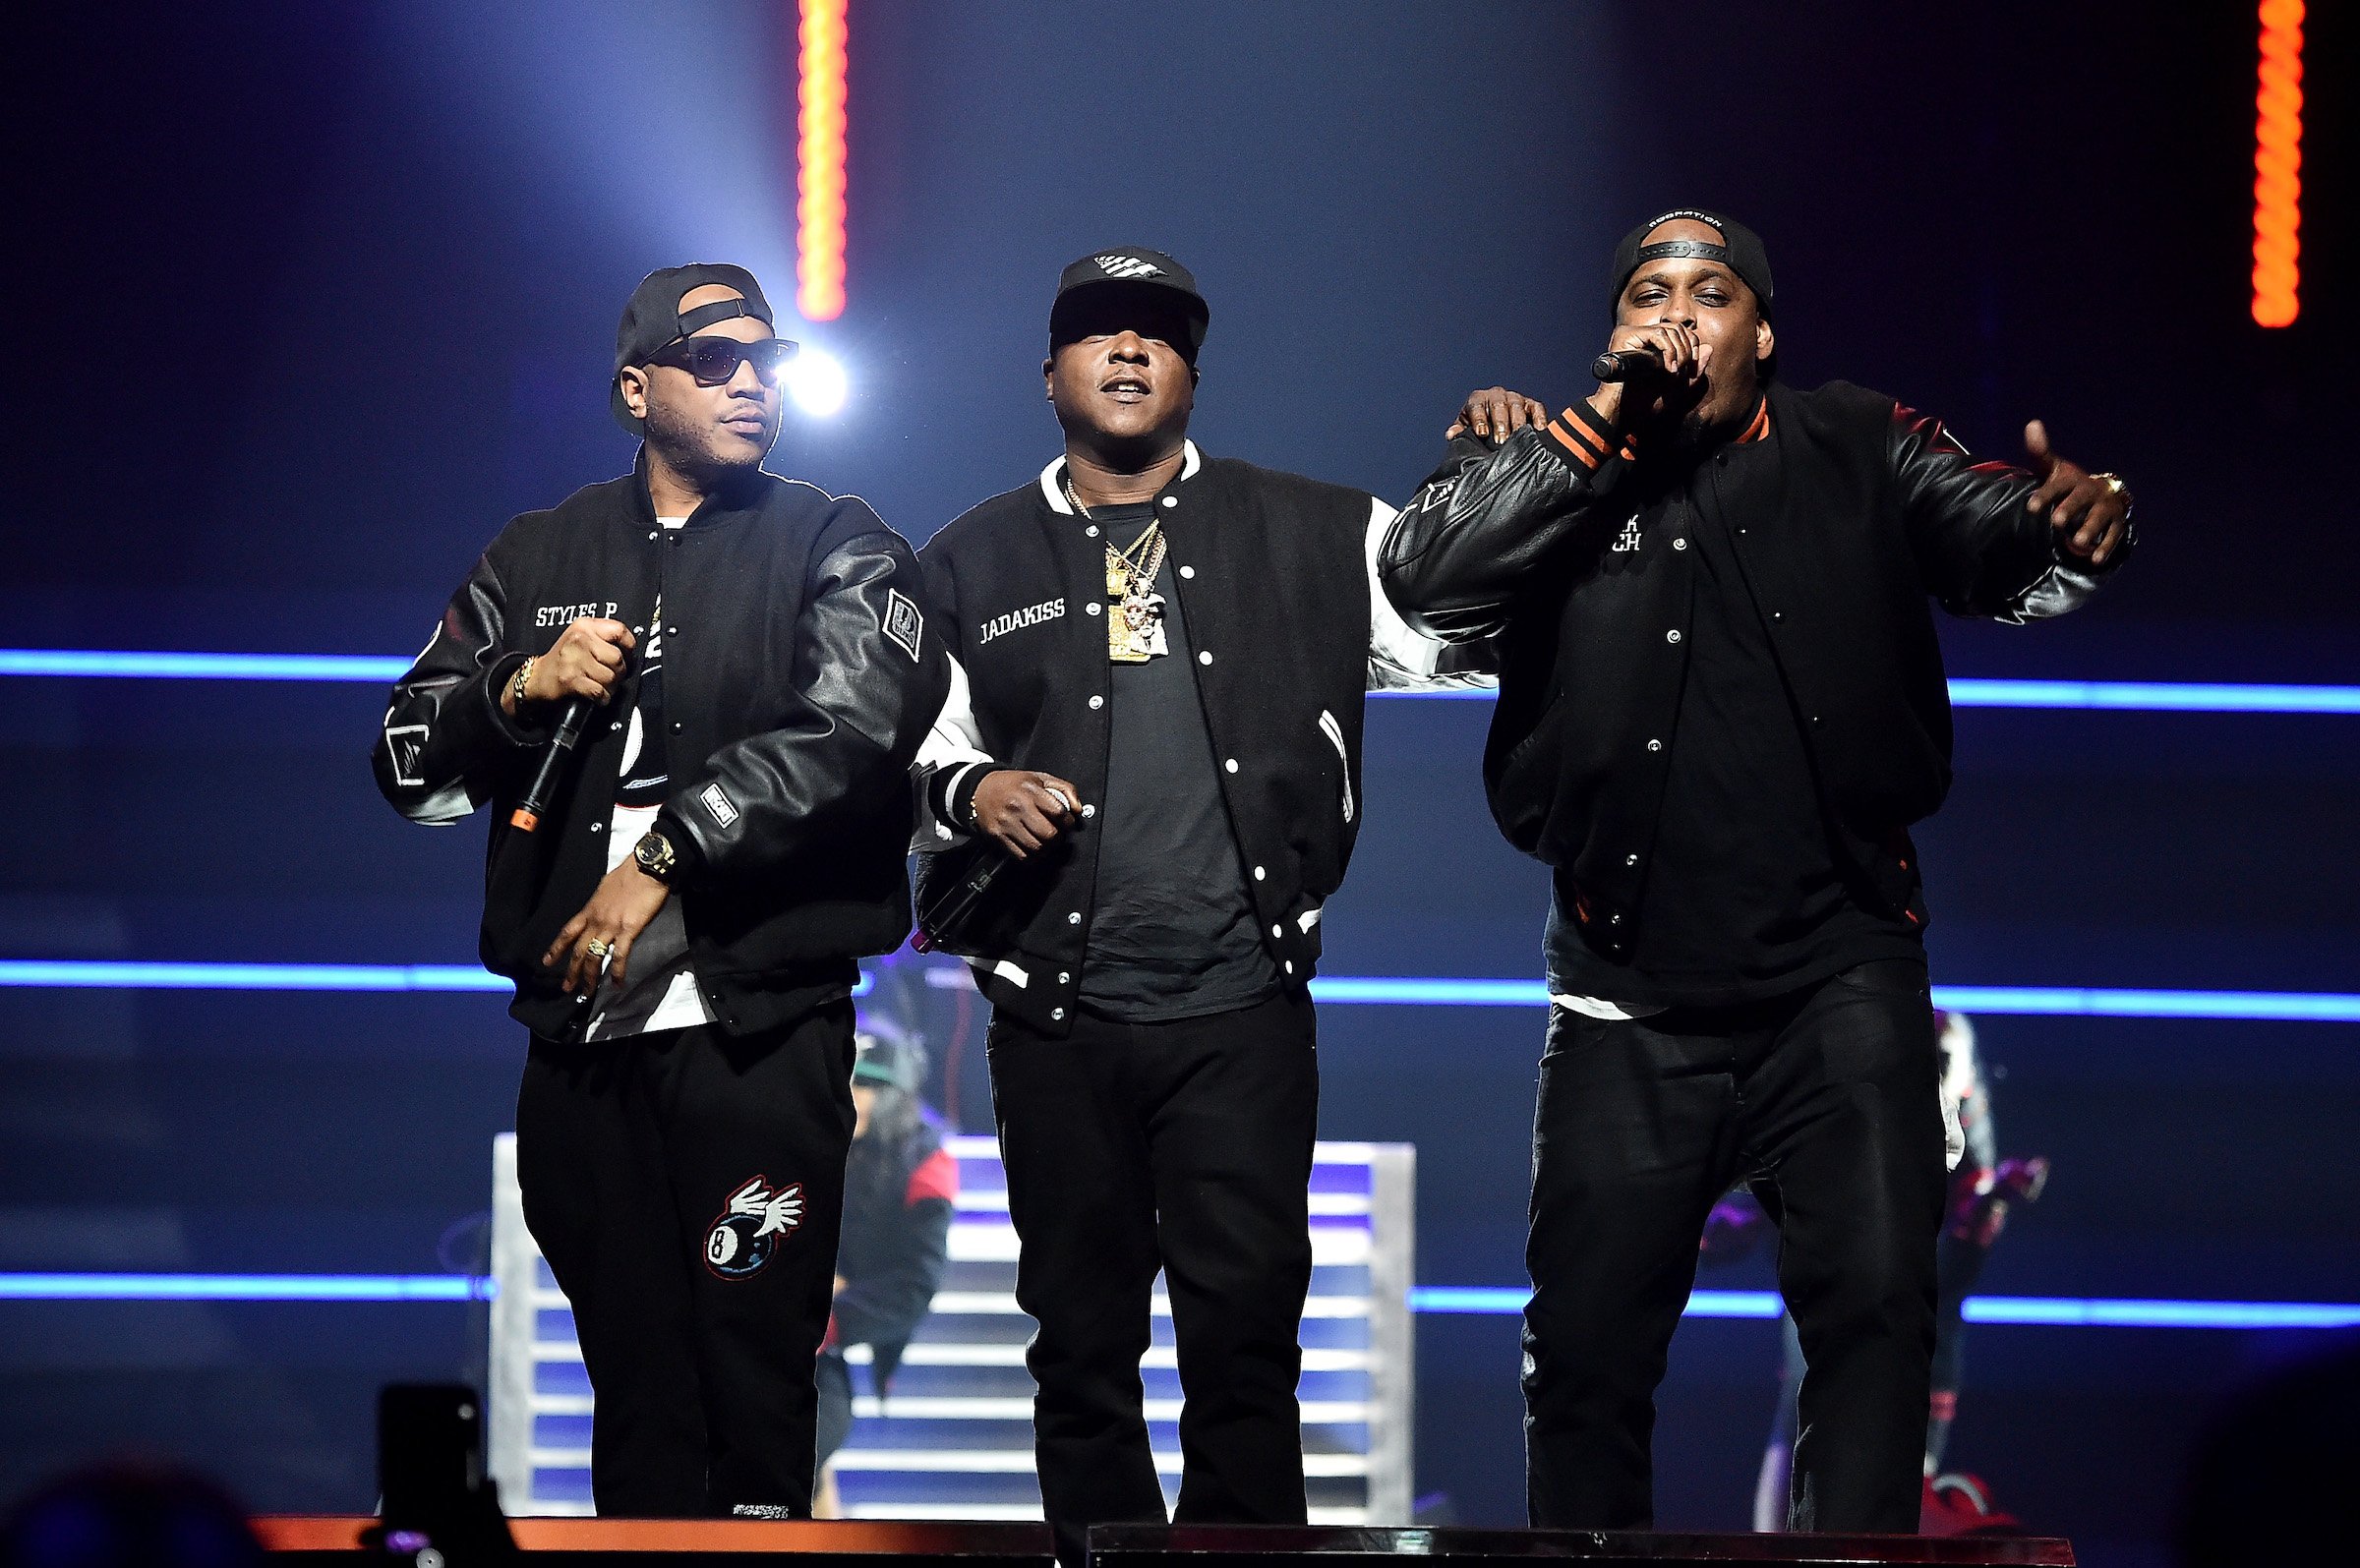 (L-R) Styles P, Jadakiss, and Sheek Louch of The Lox perform onstage in Brooklyn